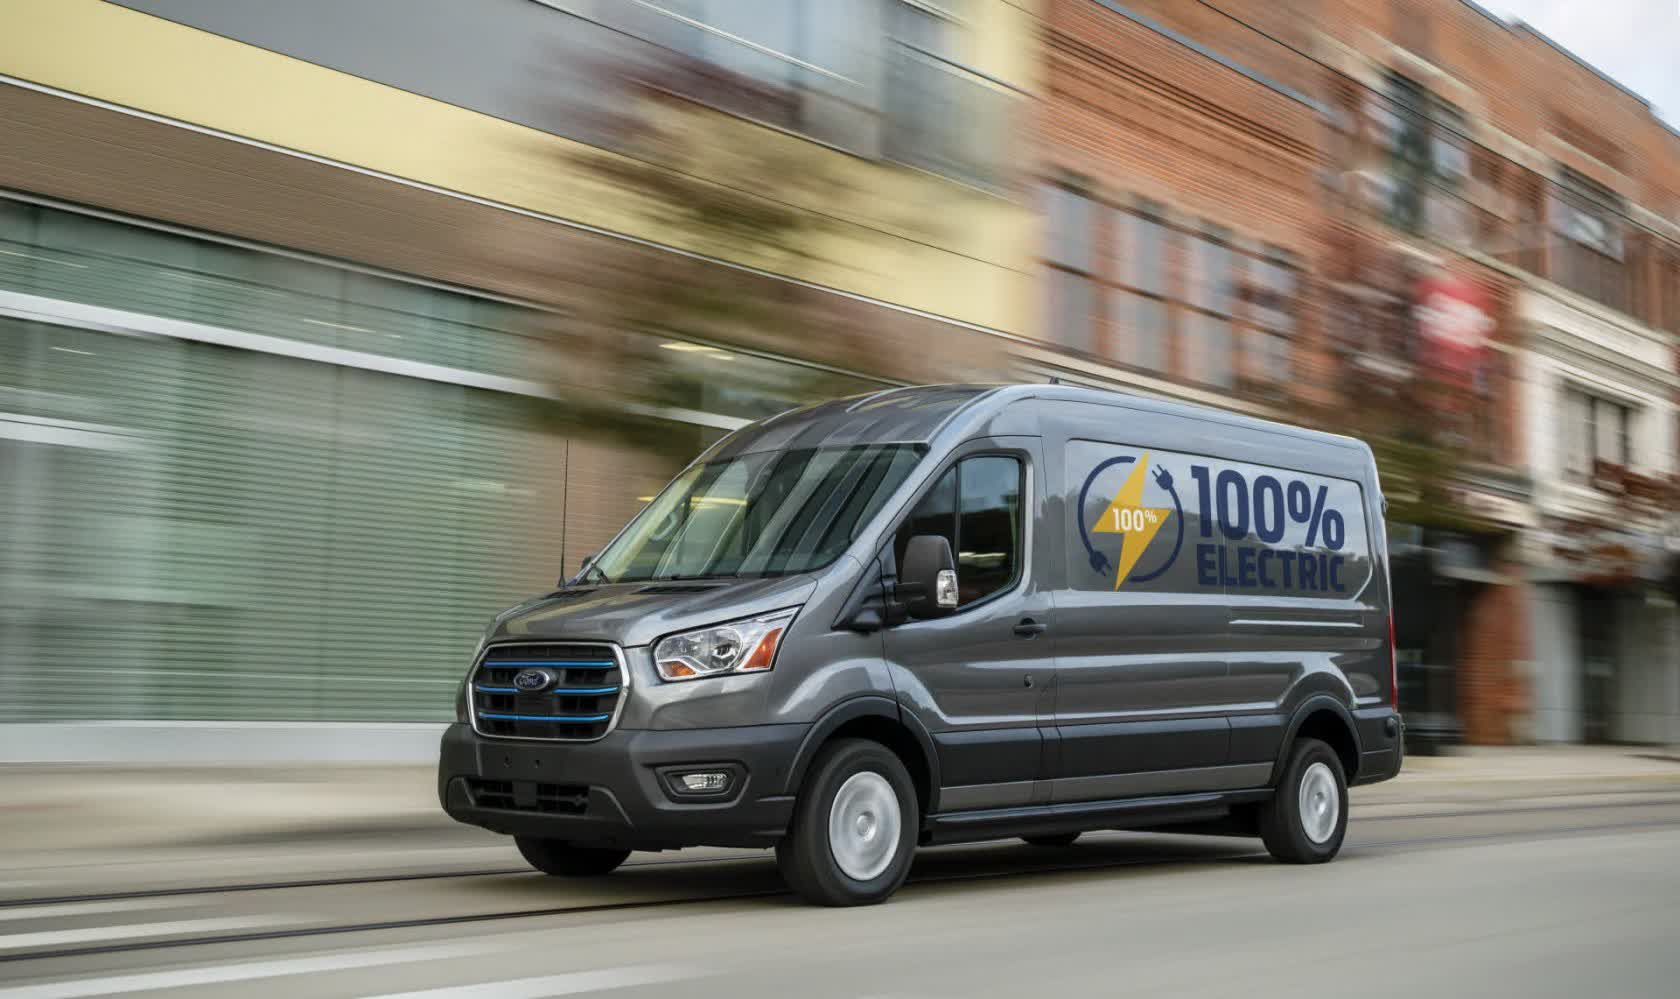 Ford's all-electric E-Transit van offers 126 miles of range for $45,000